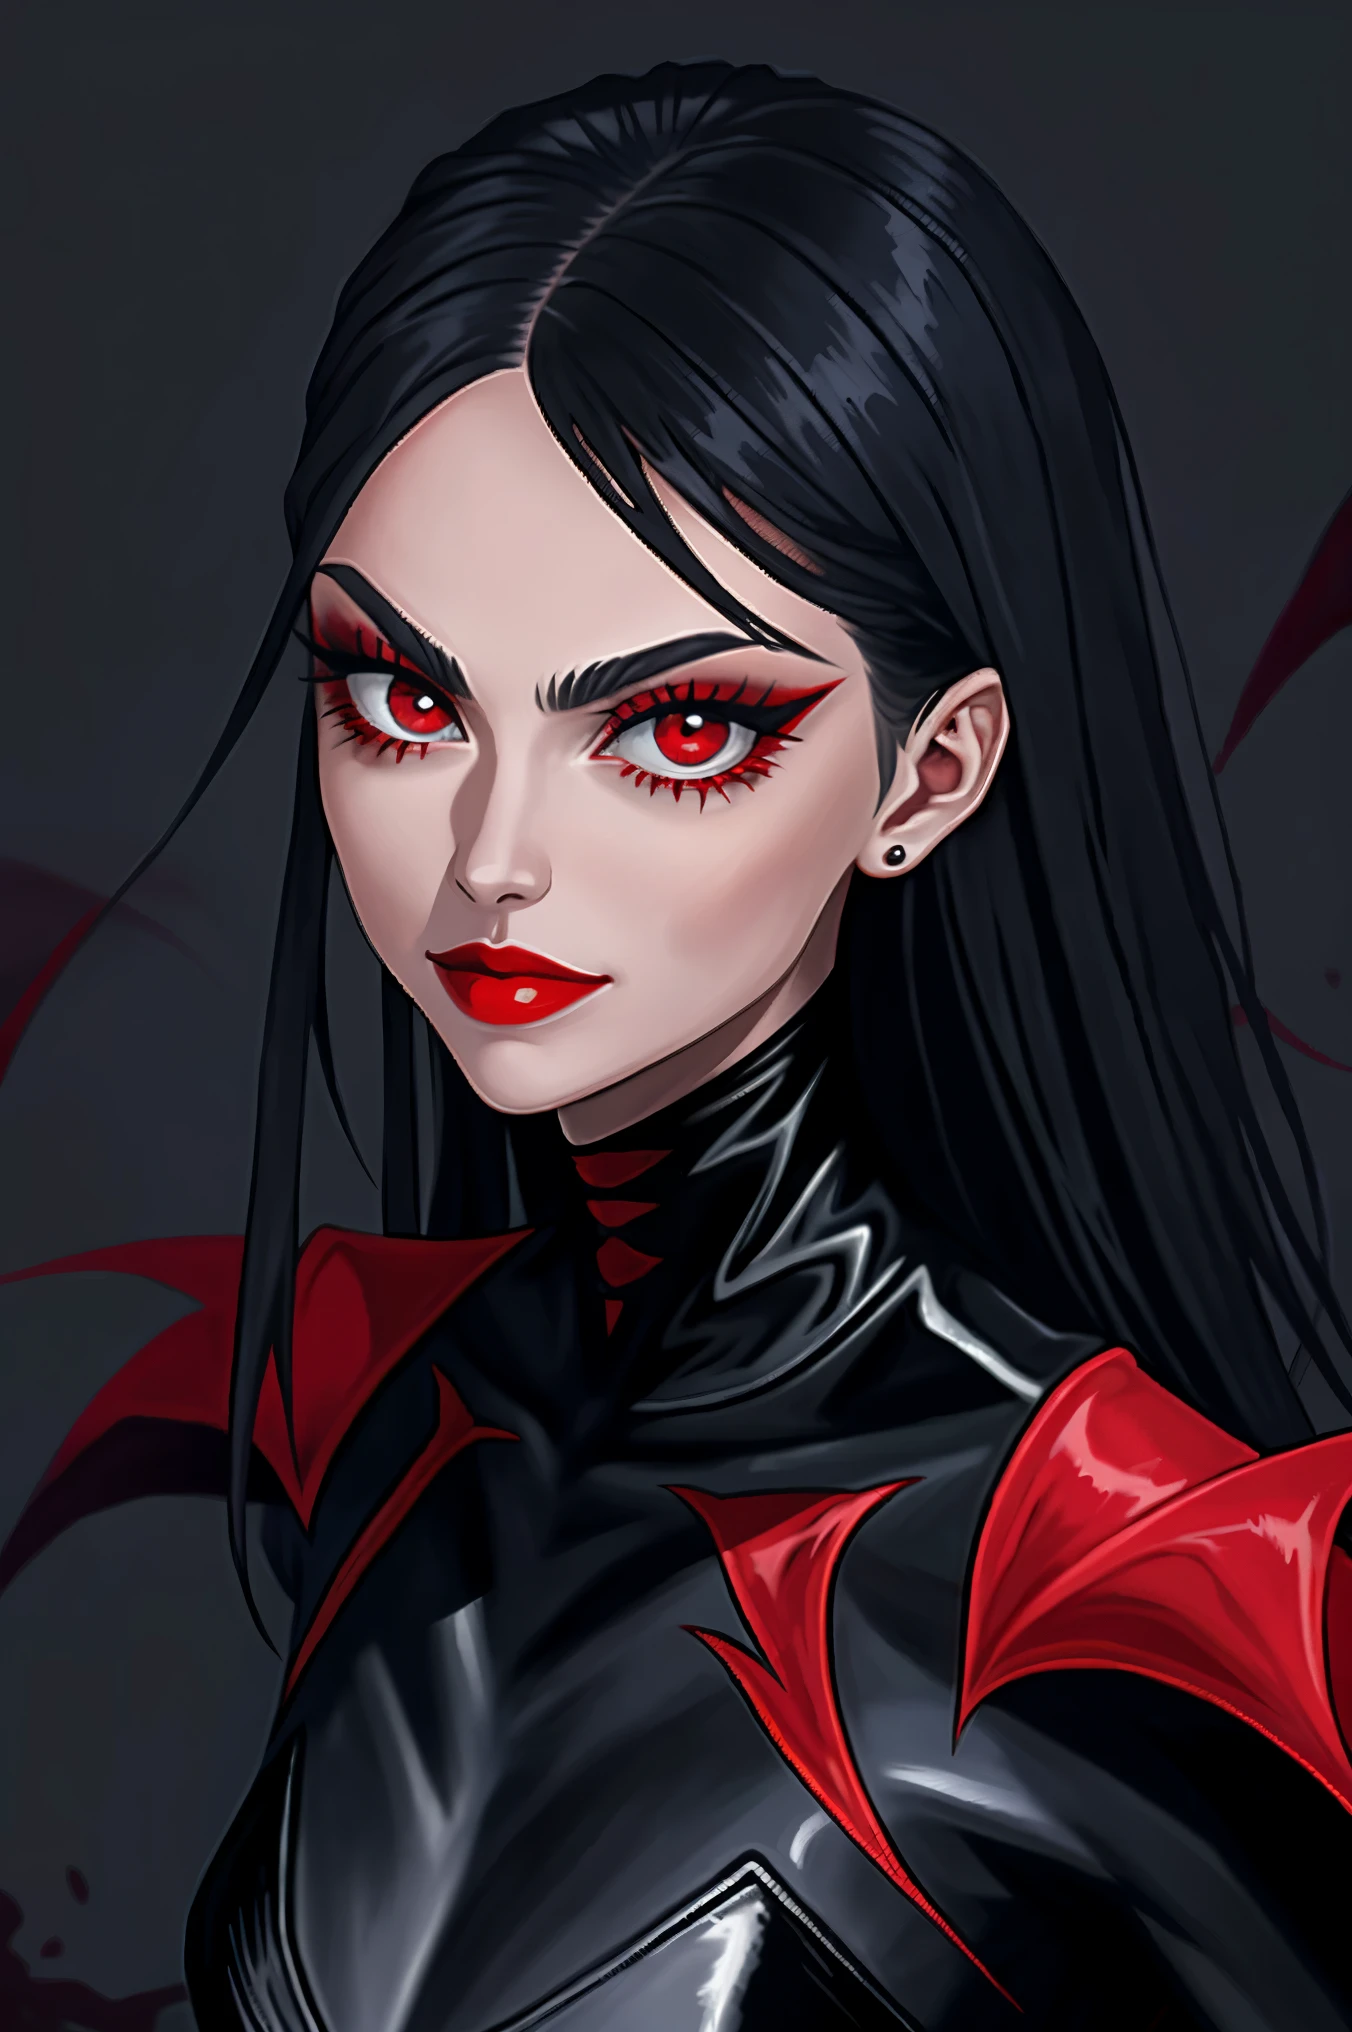 Mujer arafed con maquillaje negro y rojo y Vampire teeth., with Fangs, Vampire teeth, vampire girl, sharp Vampire teeth, vampire portrait, Fangs, female vampire, androgynous vampire, vampire Fangs, scary vampire, sharp and pointy Vampire teeth, vampire woman, Fangs extended, Fangs and drool